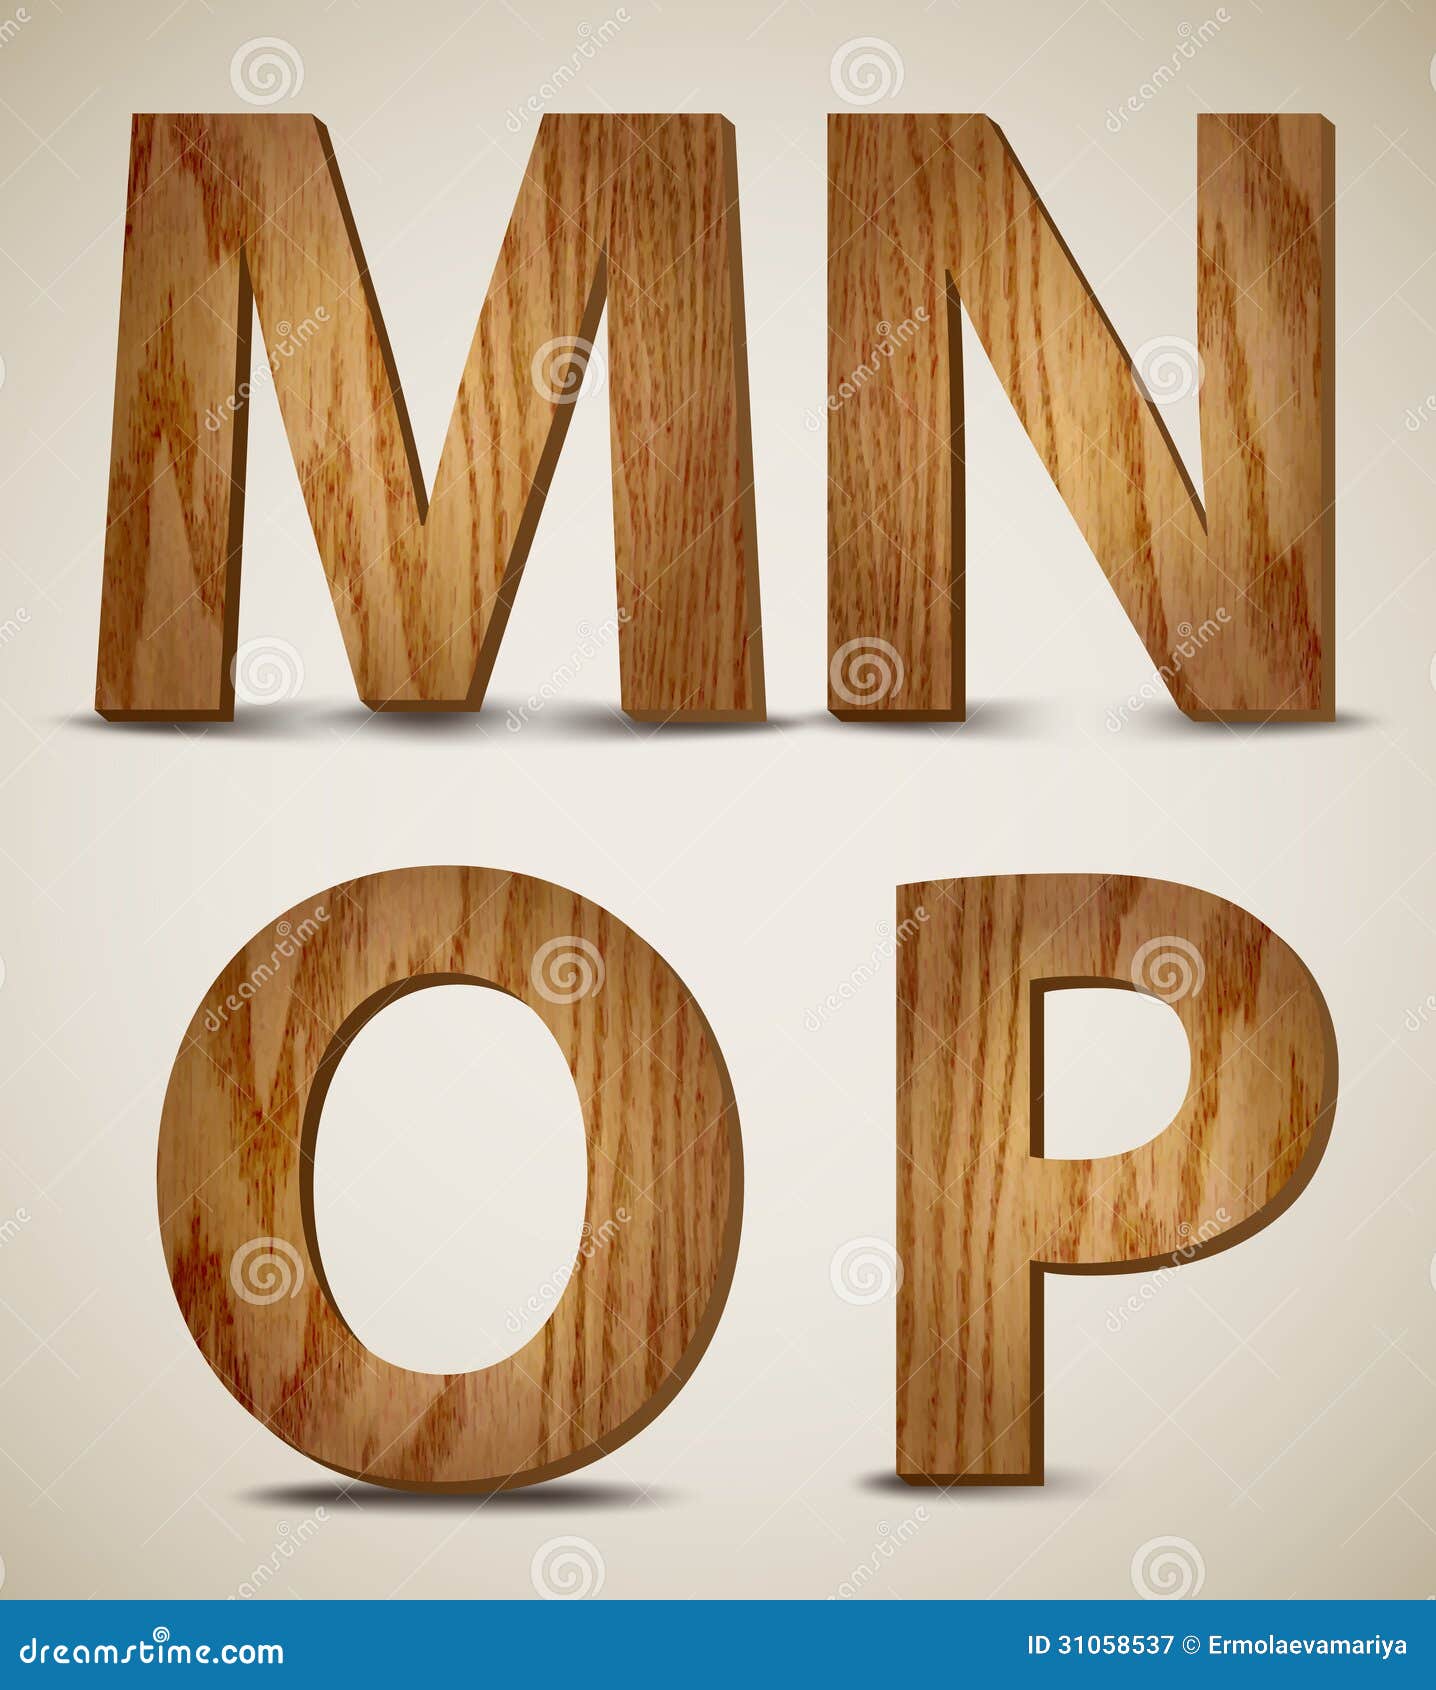 Grunge Wooden Alphabet Letters M, N, O, P. Vector Stock ...